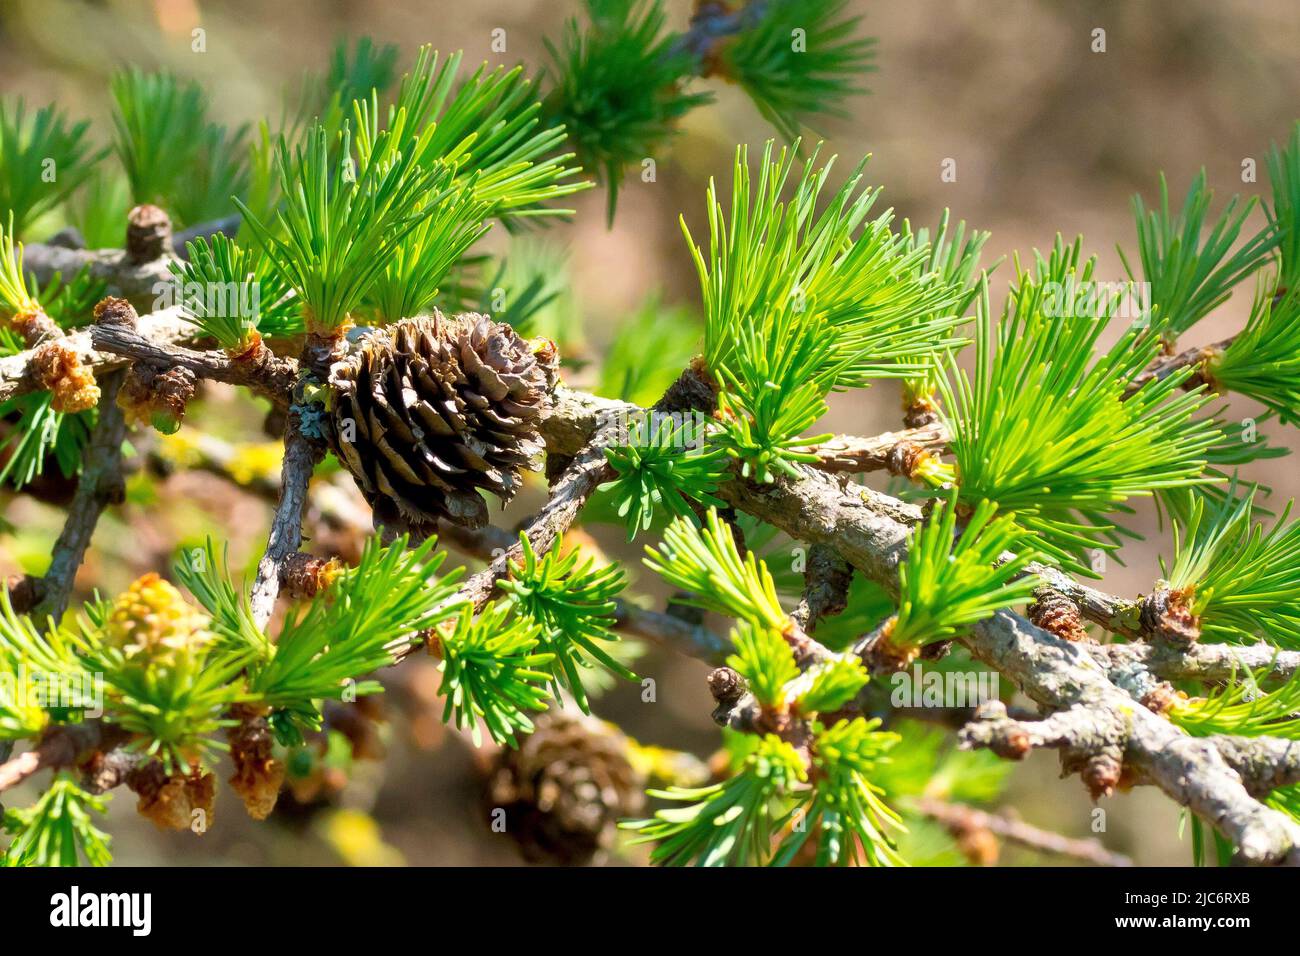 Larch, most likely Japanese Larch (larix kaempferi), close up of a branch showing a mature cone and fresh green needles sprouting in the springtime. Stock Photo